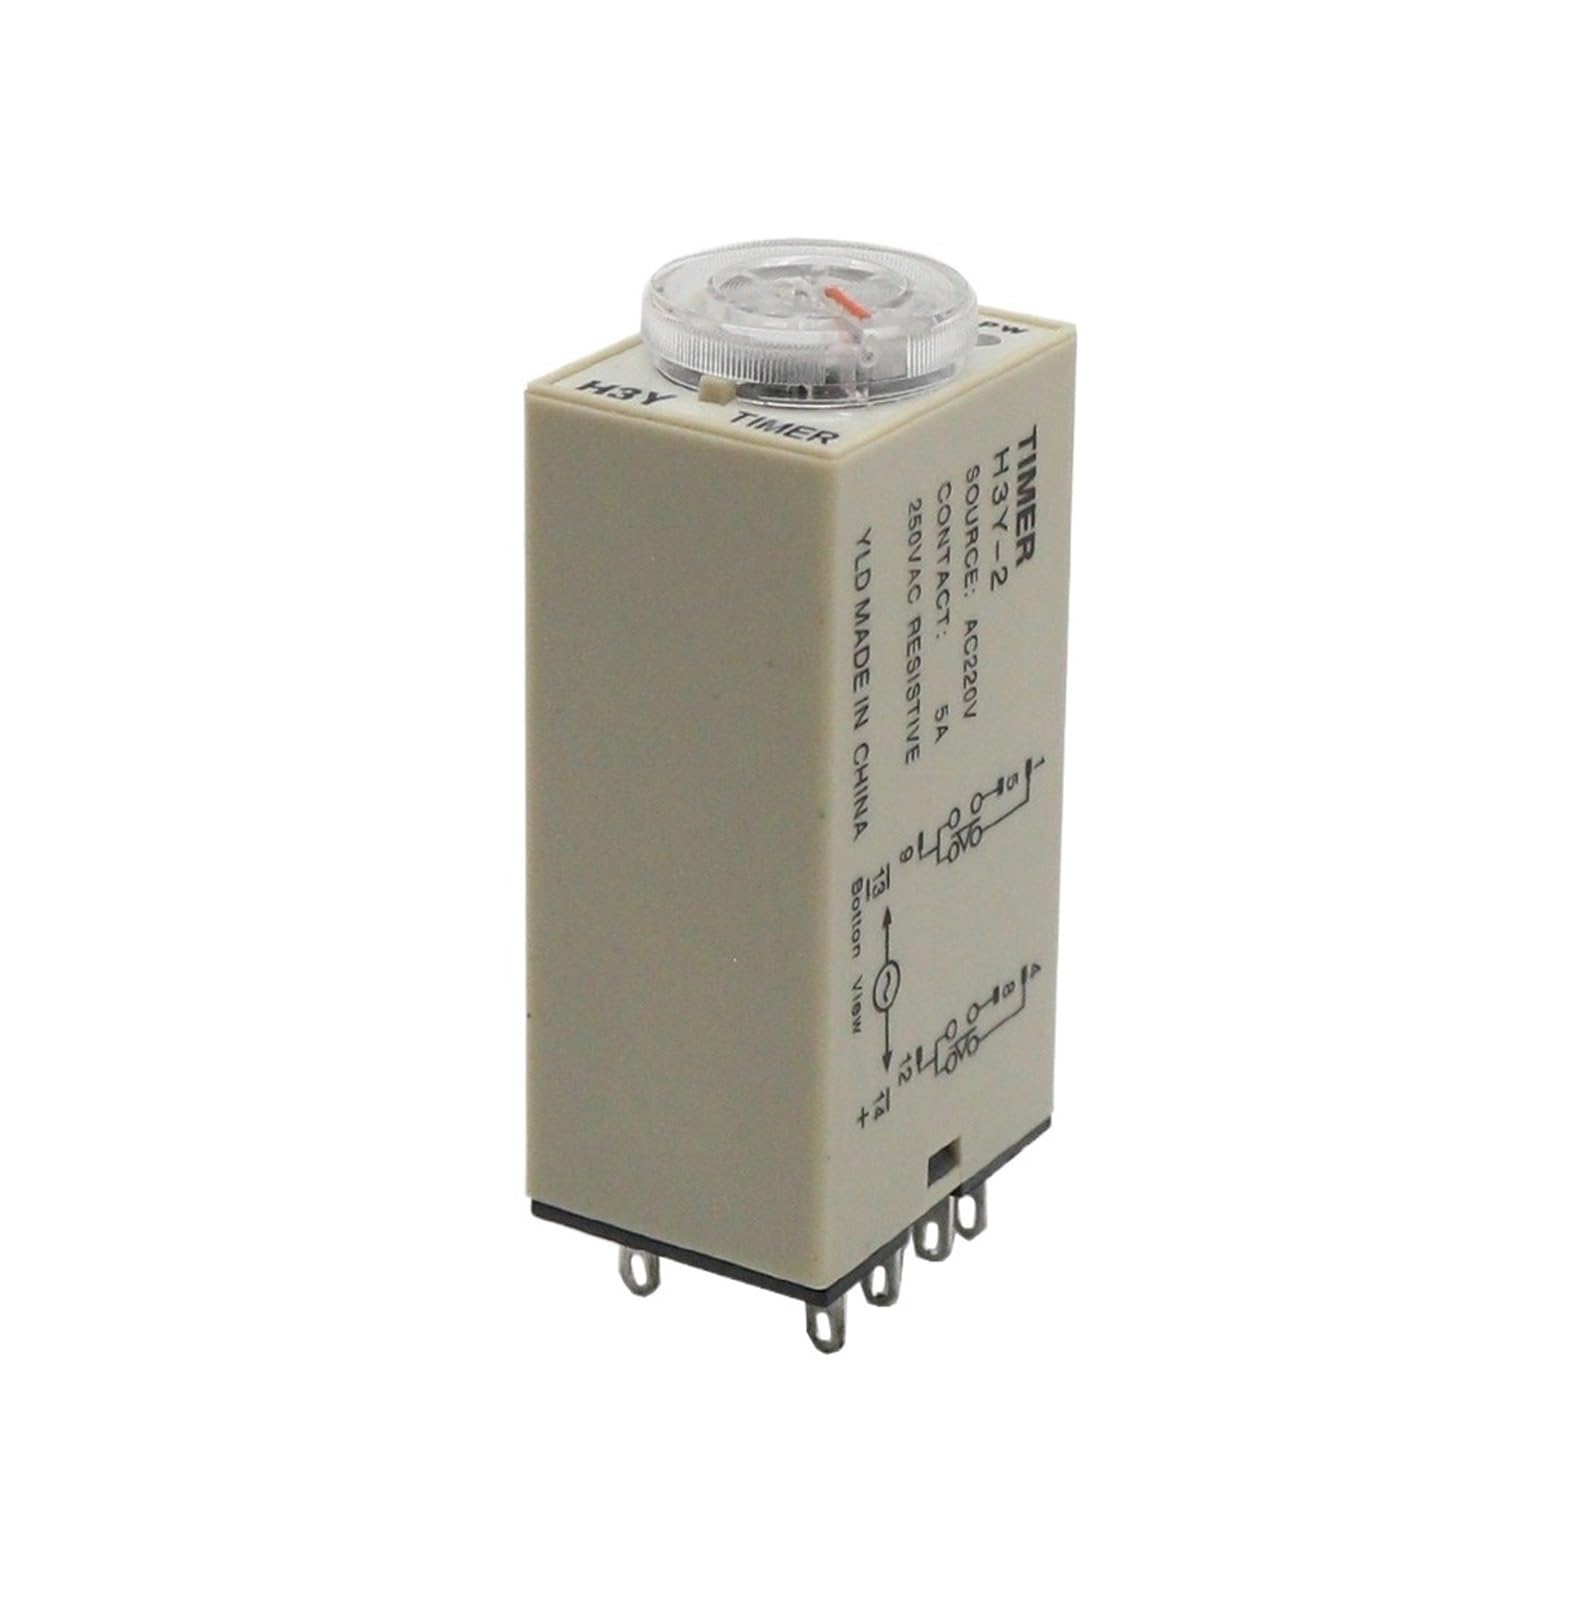 1pcs Power on Delay Time Relay H3Y-2 Small 8-pinDC12V24vAC220v Timer Switch 1S 3S 5S 30S 60S 5M 10M 30M 60M NWPNLXEA(DC 12V,H3Y-2 10Minute) von NWPNLXEA